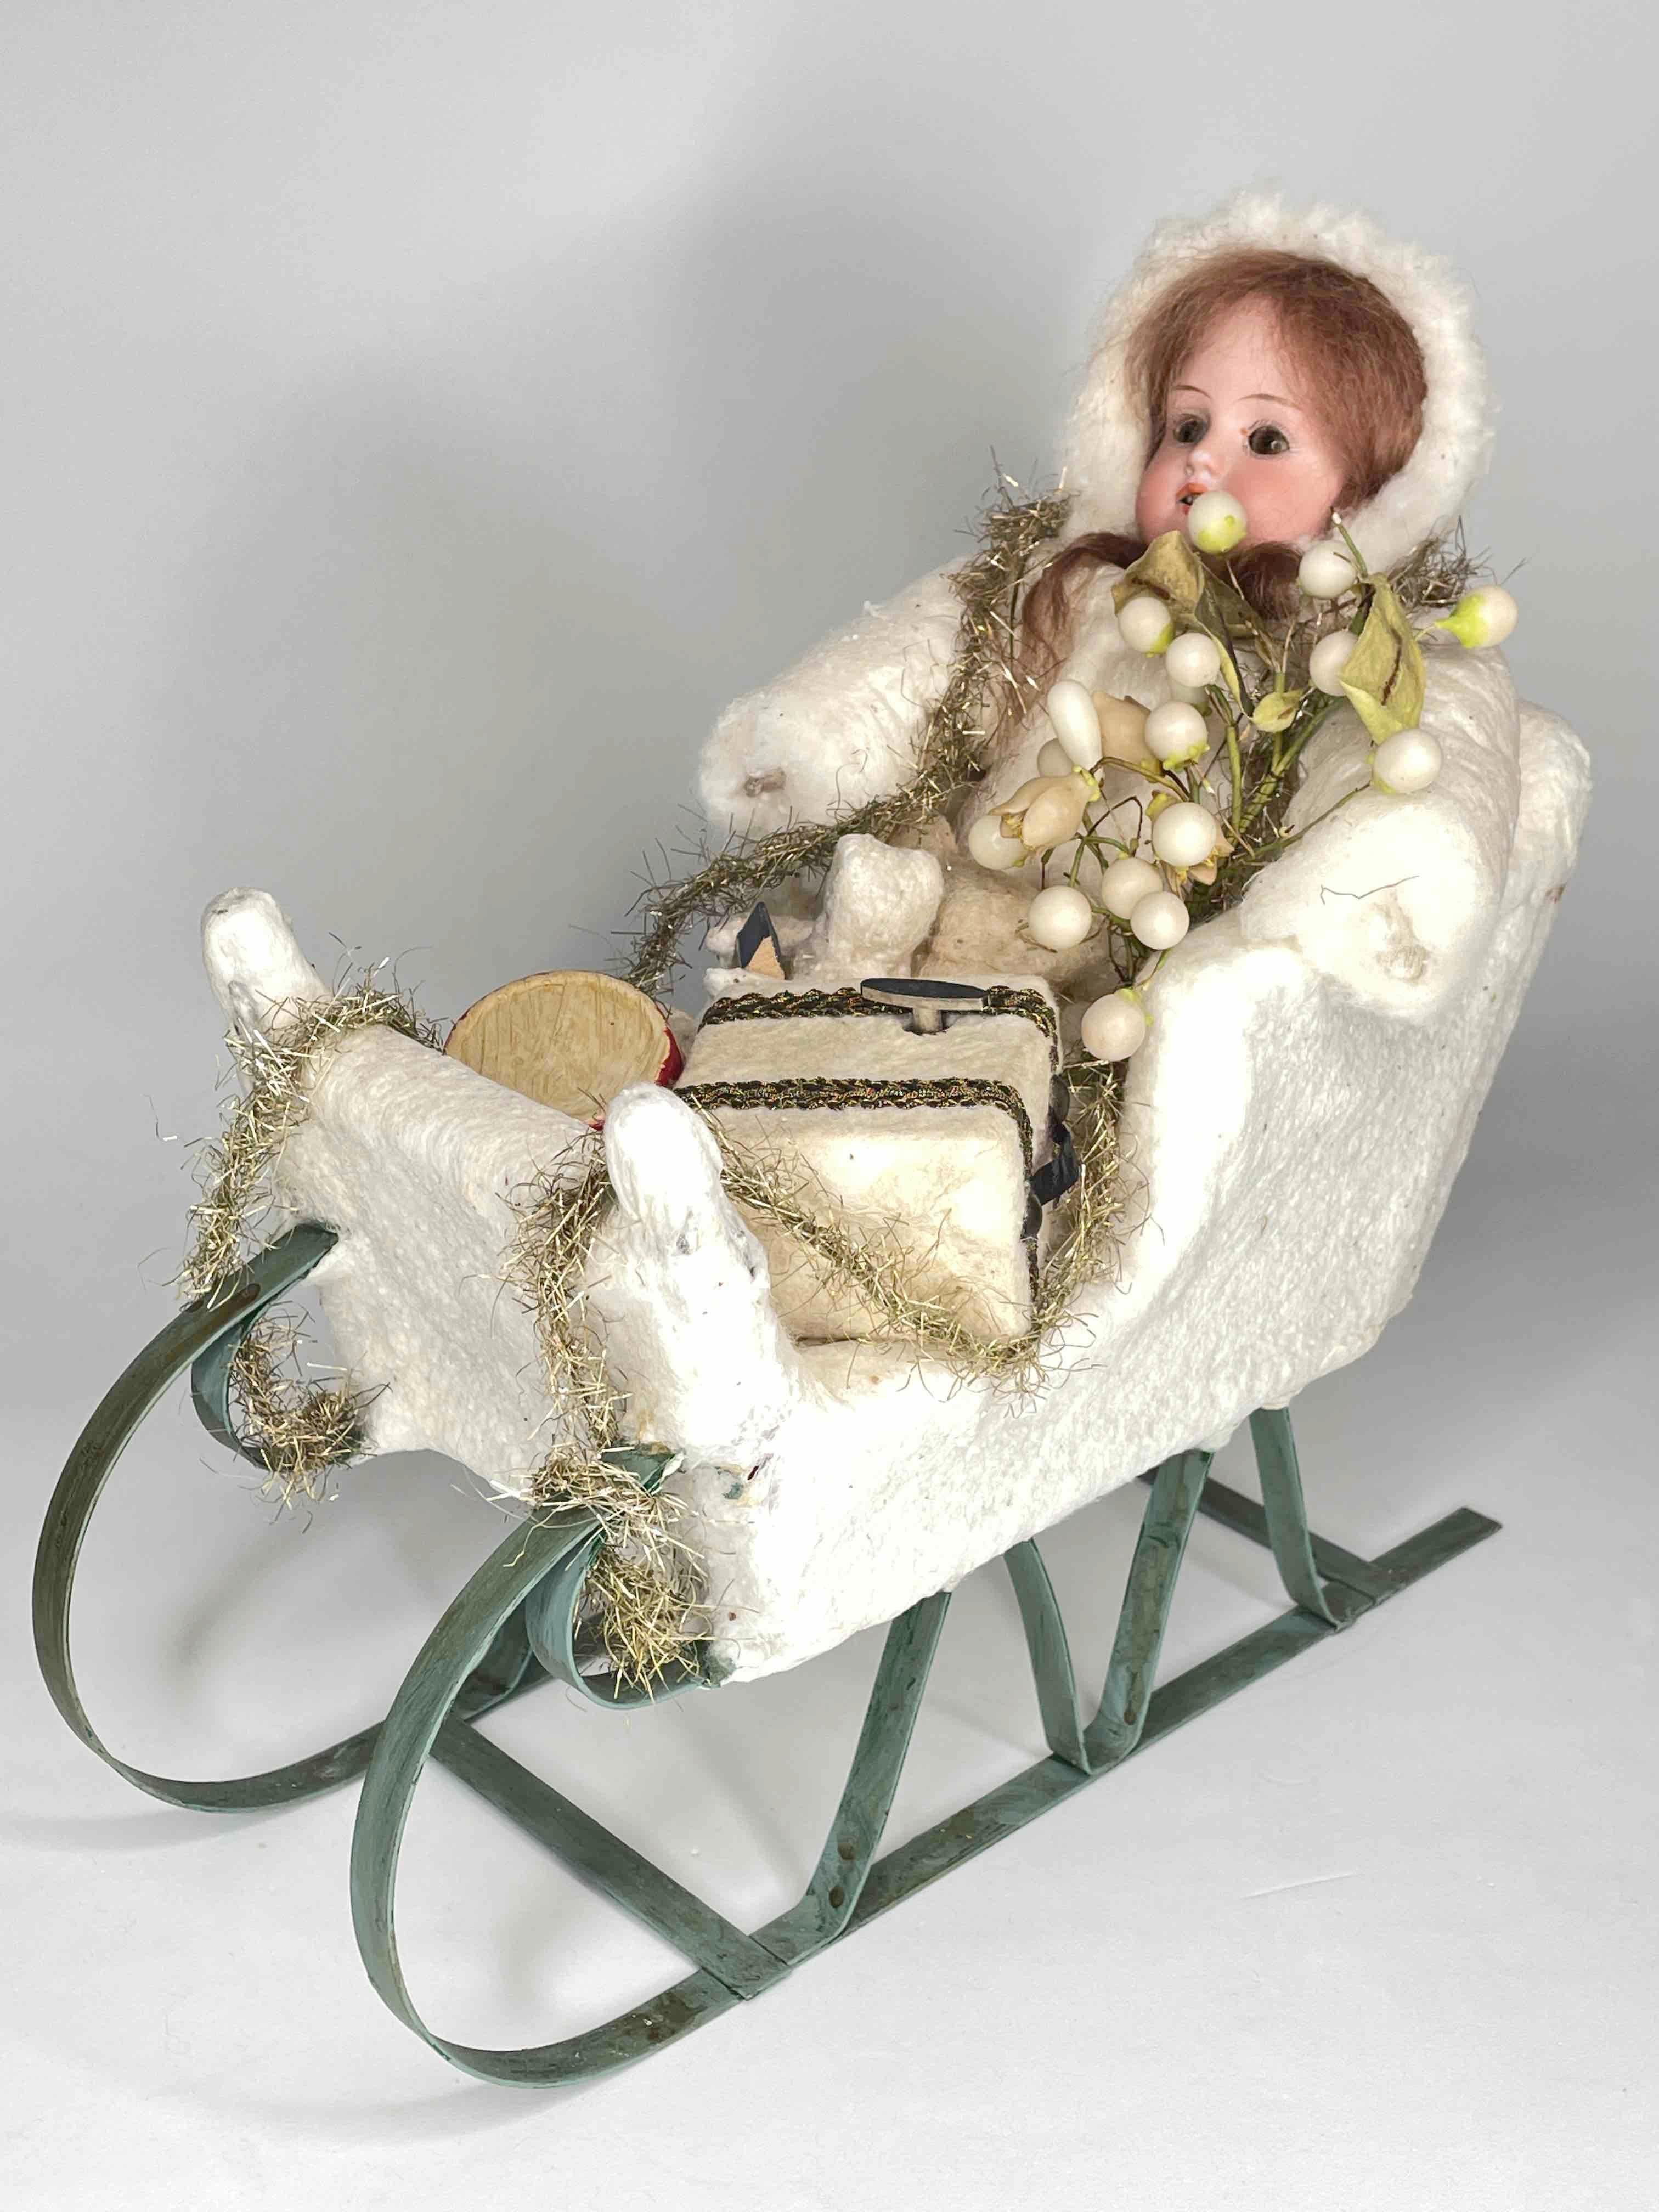 This beautiful Bisque Head doll, with a smaller baby doll, is seated in a metal sled. The doll has brown glass eyes, blonde hair and teeth. The coat is made of pressed cotton. The sled was edged in pressed cotton and fitted with a papier-mâché drum,